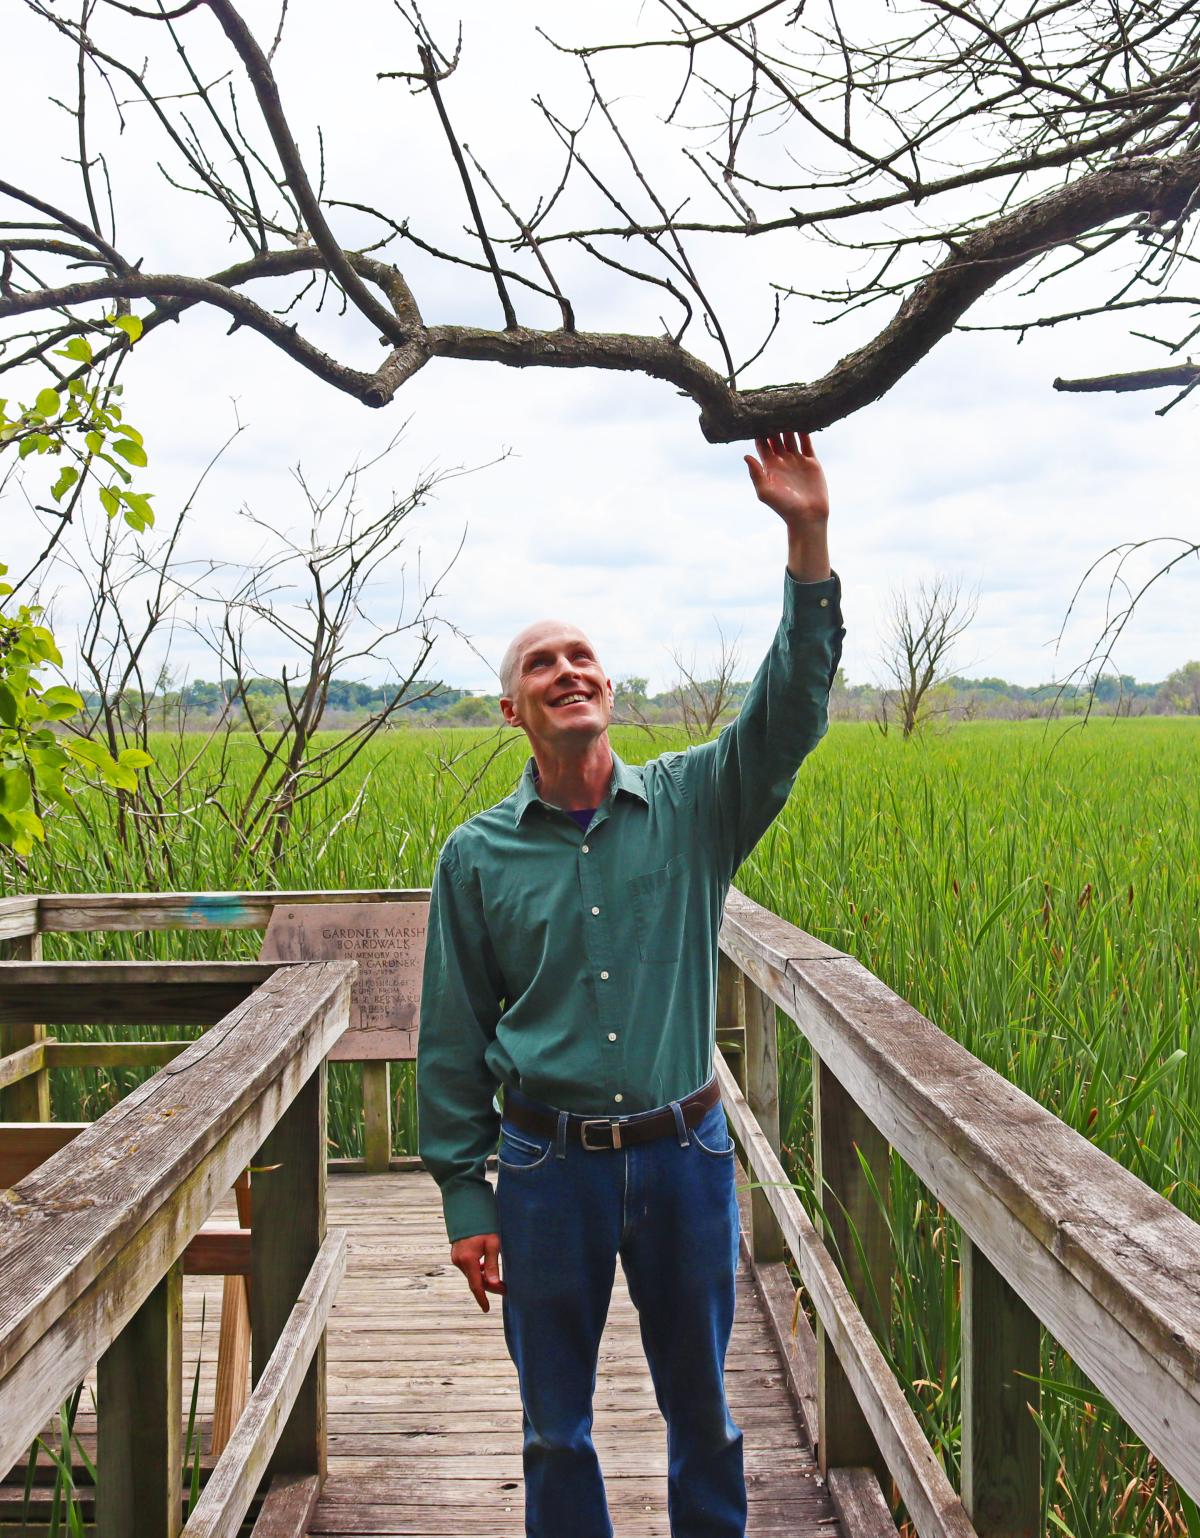 Madison Public Library Naturalist-in-Residence John C. Newman stands among the trees with a prairie in the background at the UW Arboretum